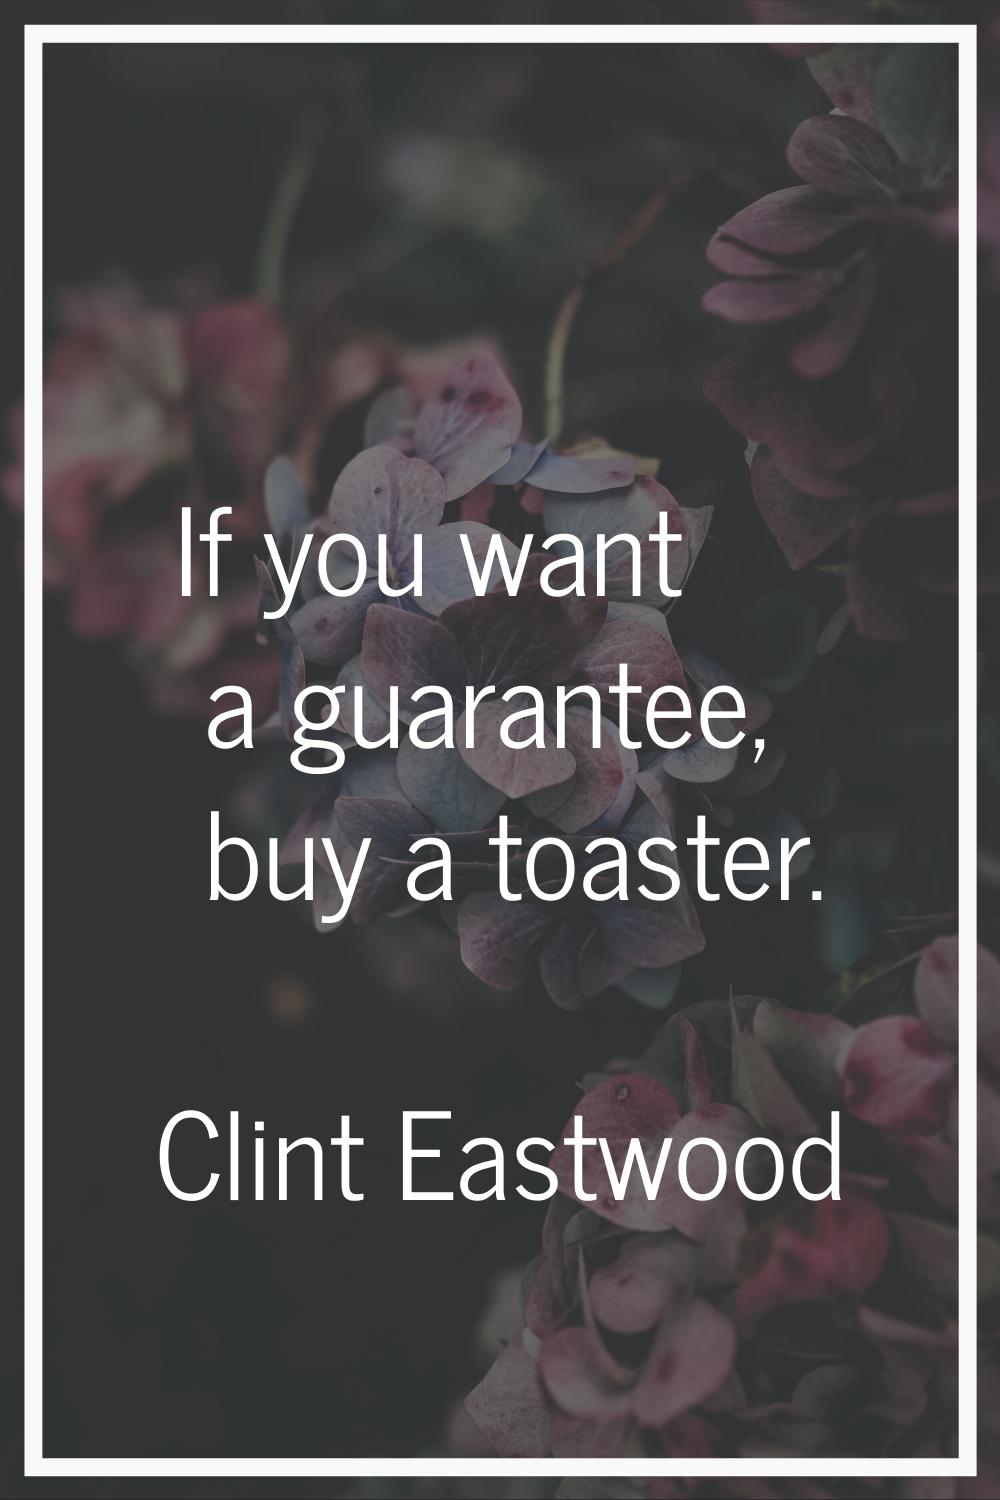 If you want a guarantee, buy a toaster.